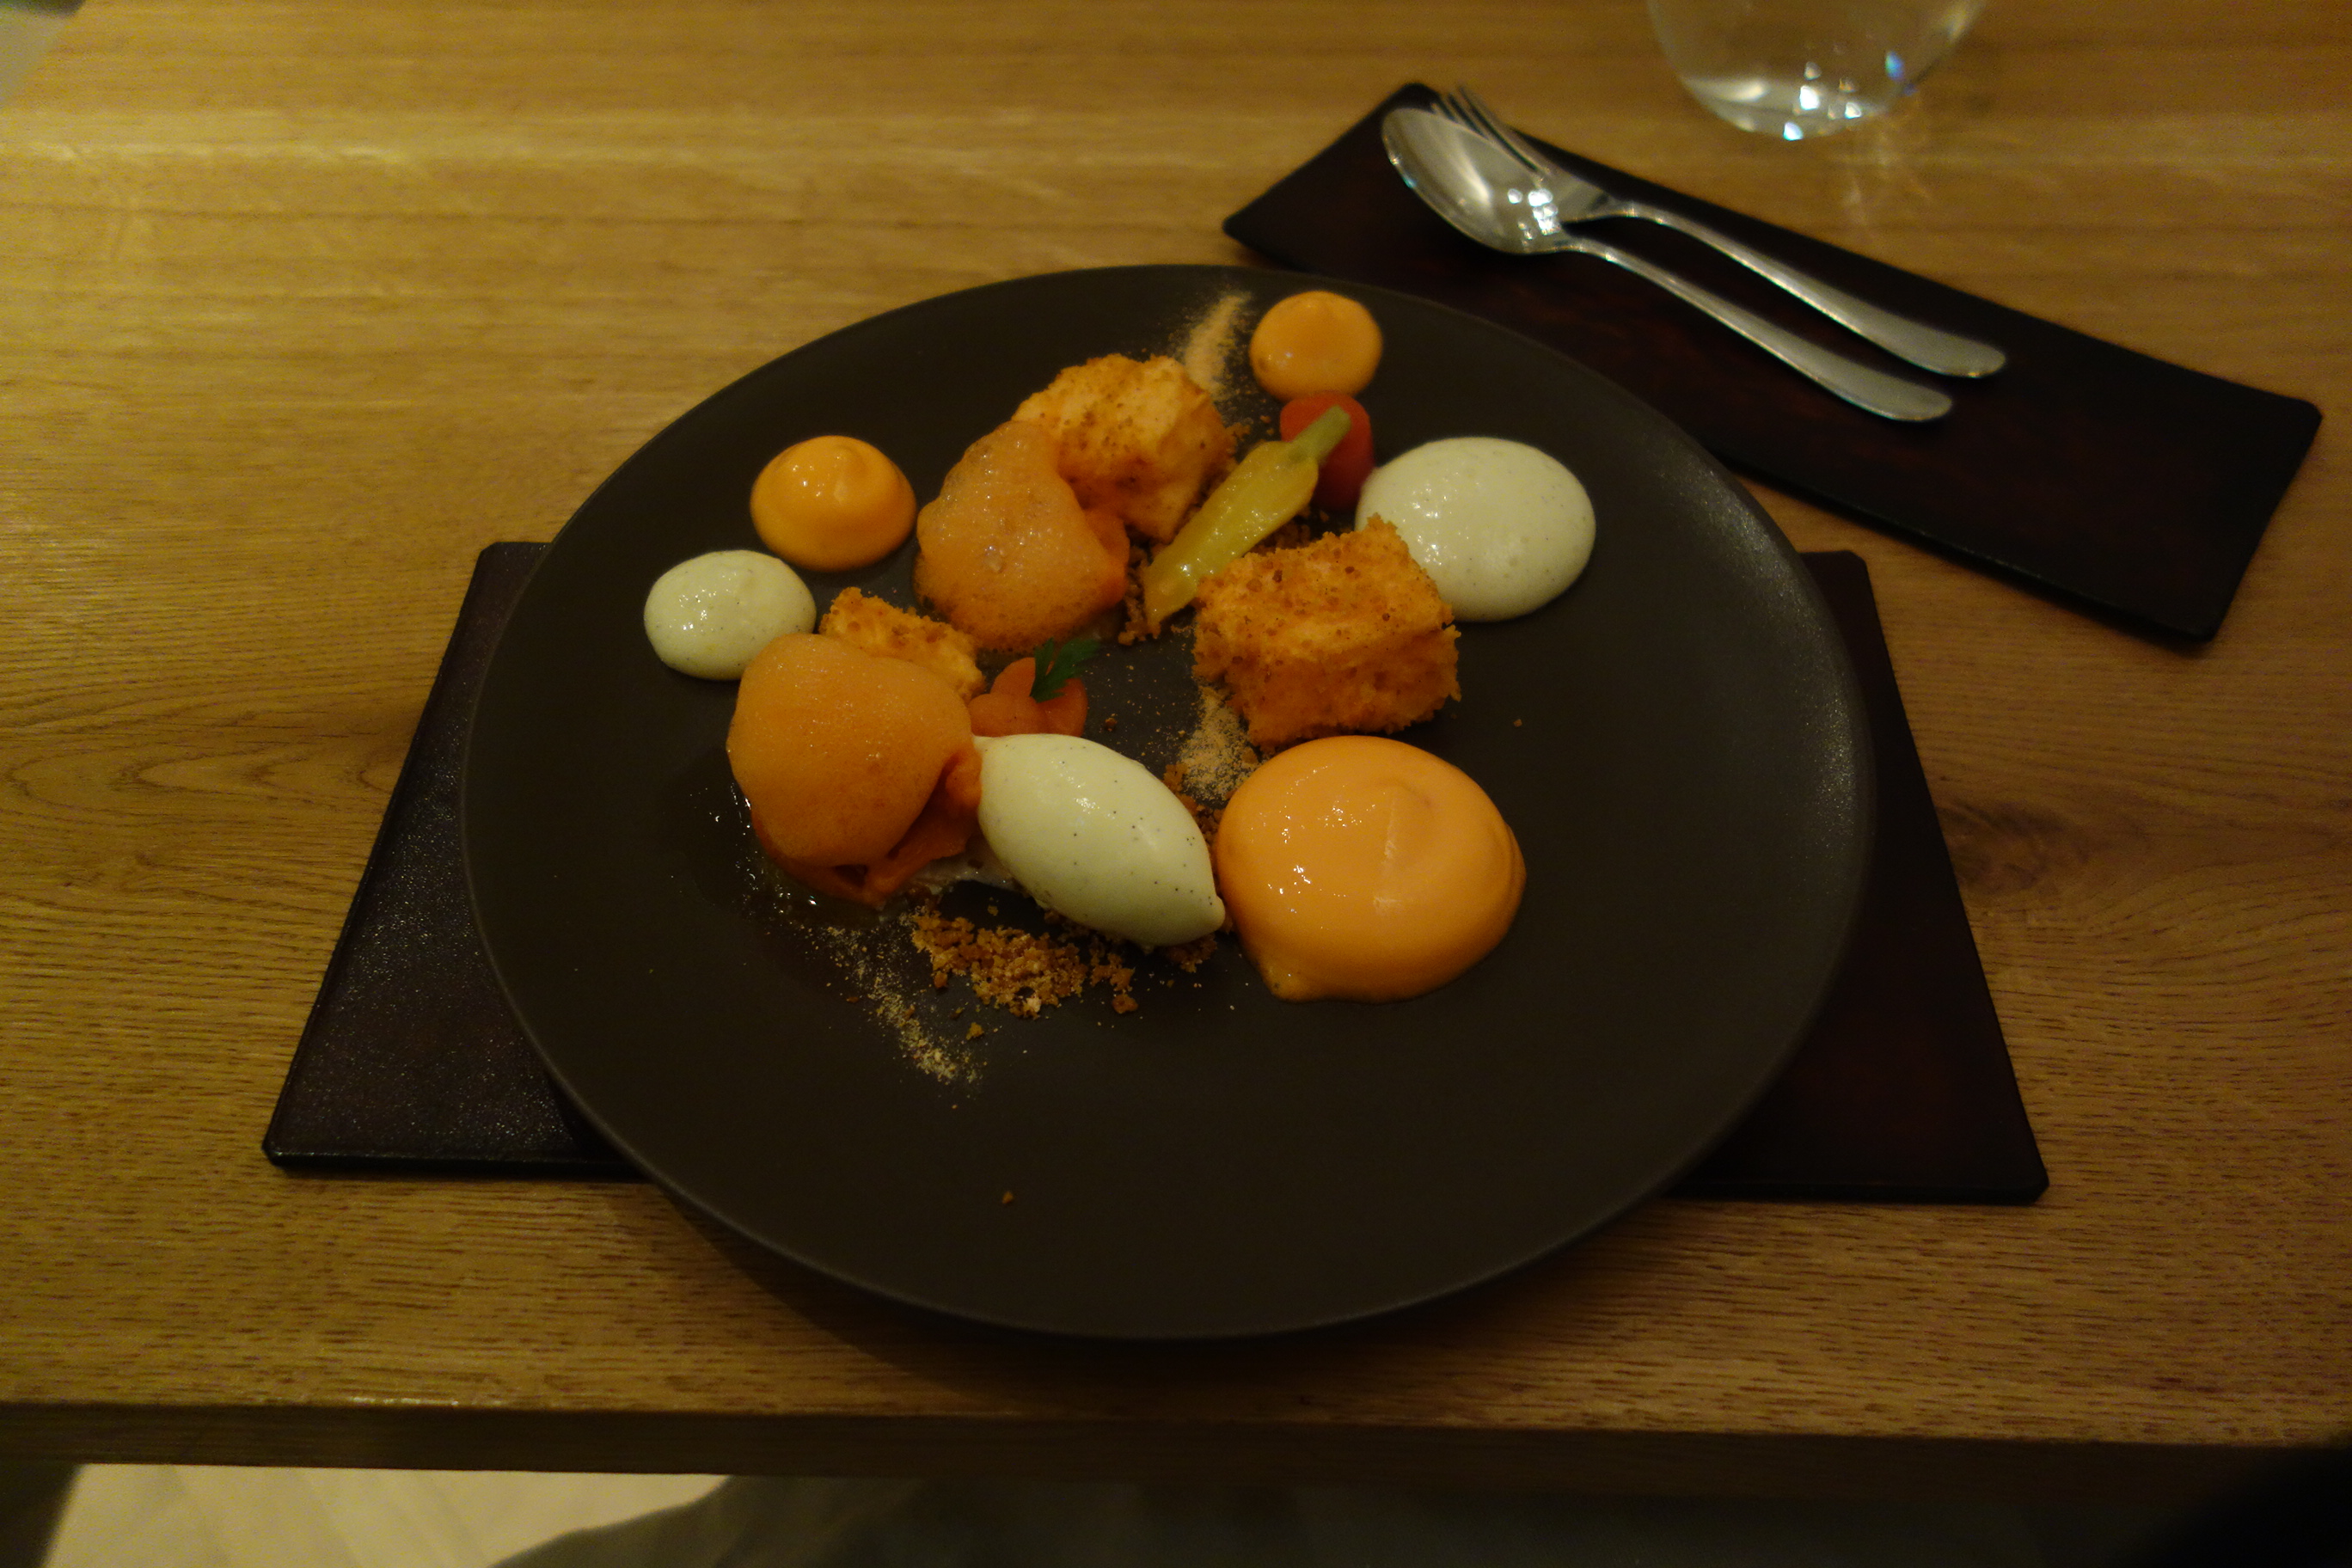 Deconstructed carrot cake